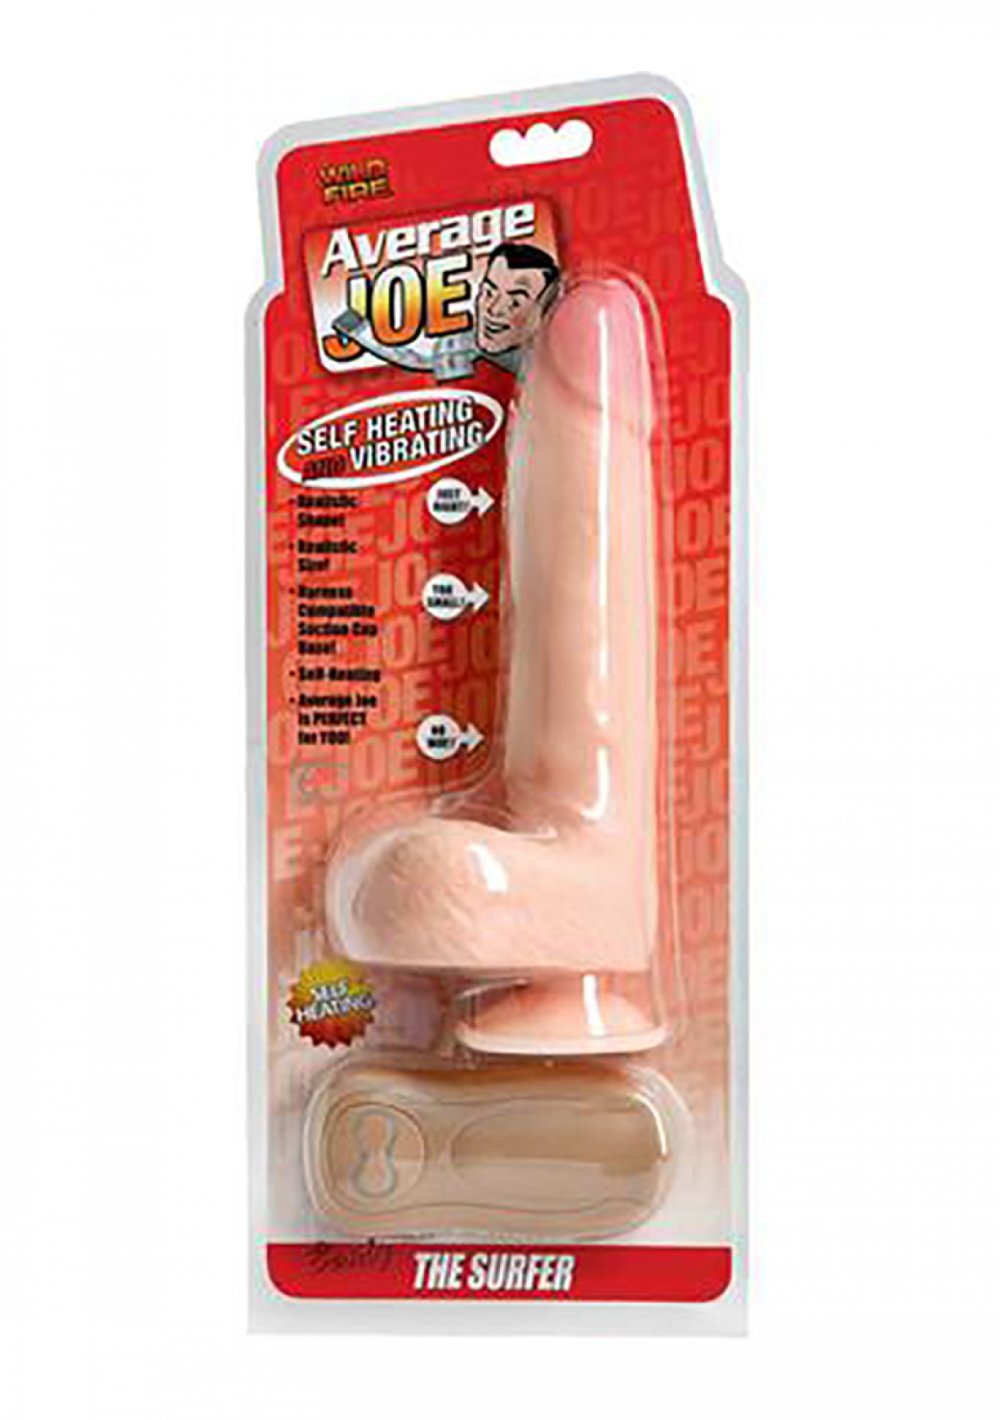 Average Joe The Surfer - Warming and Pulsating Passion Toy